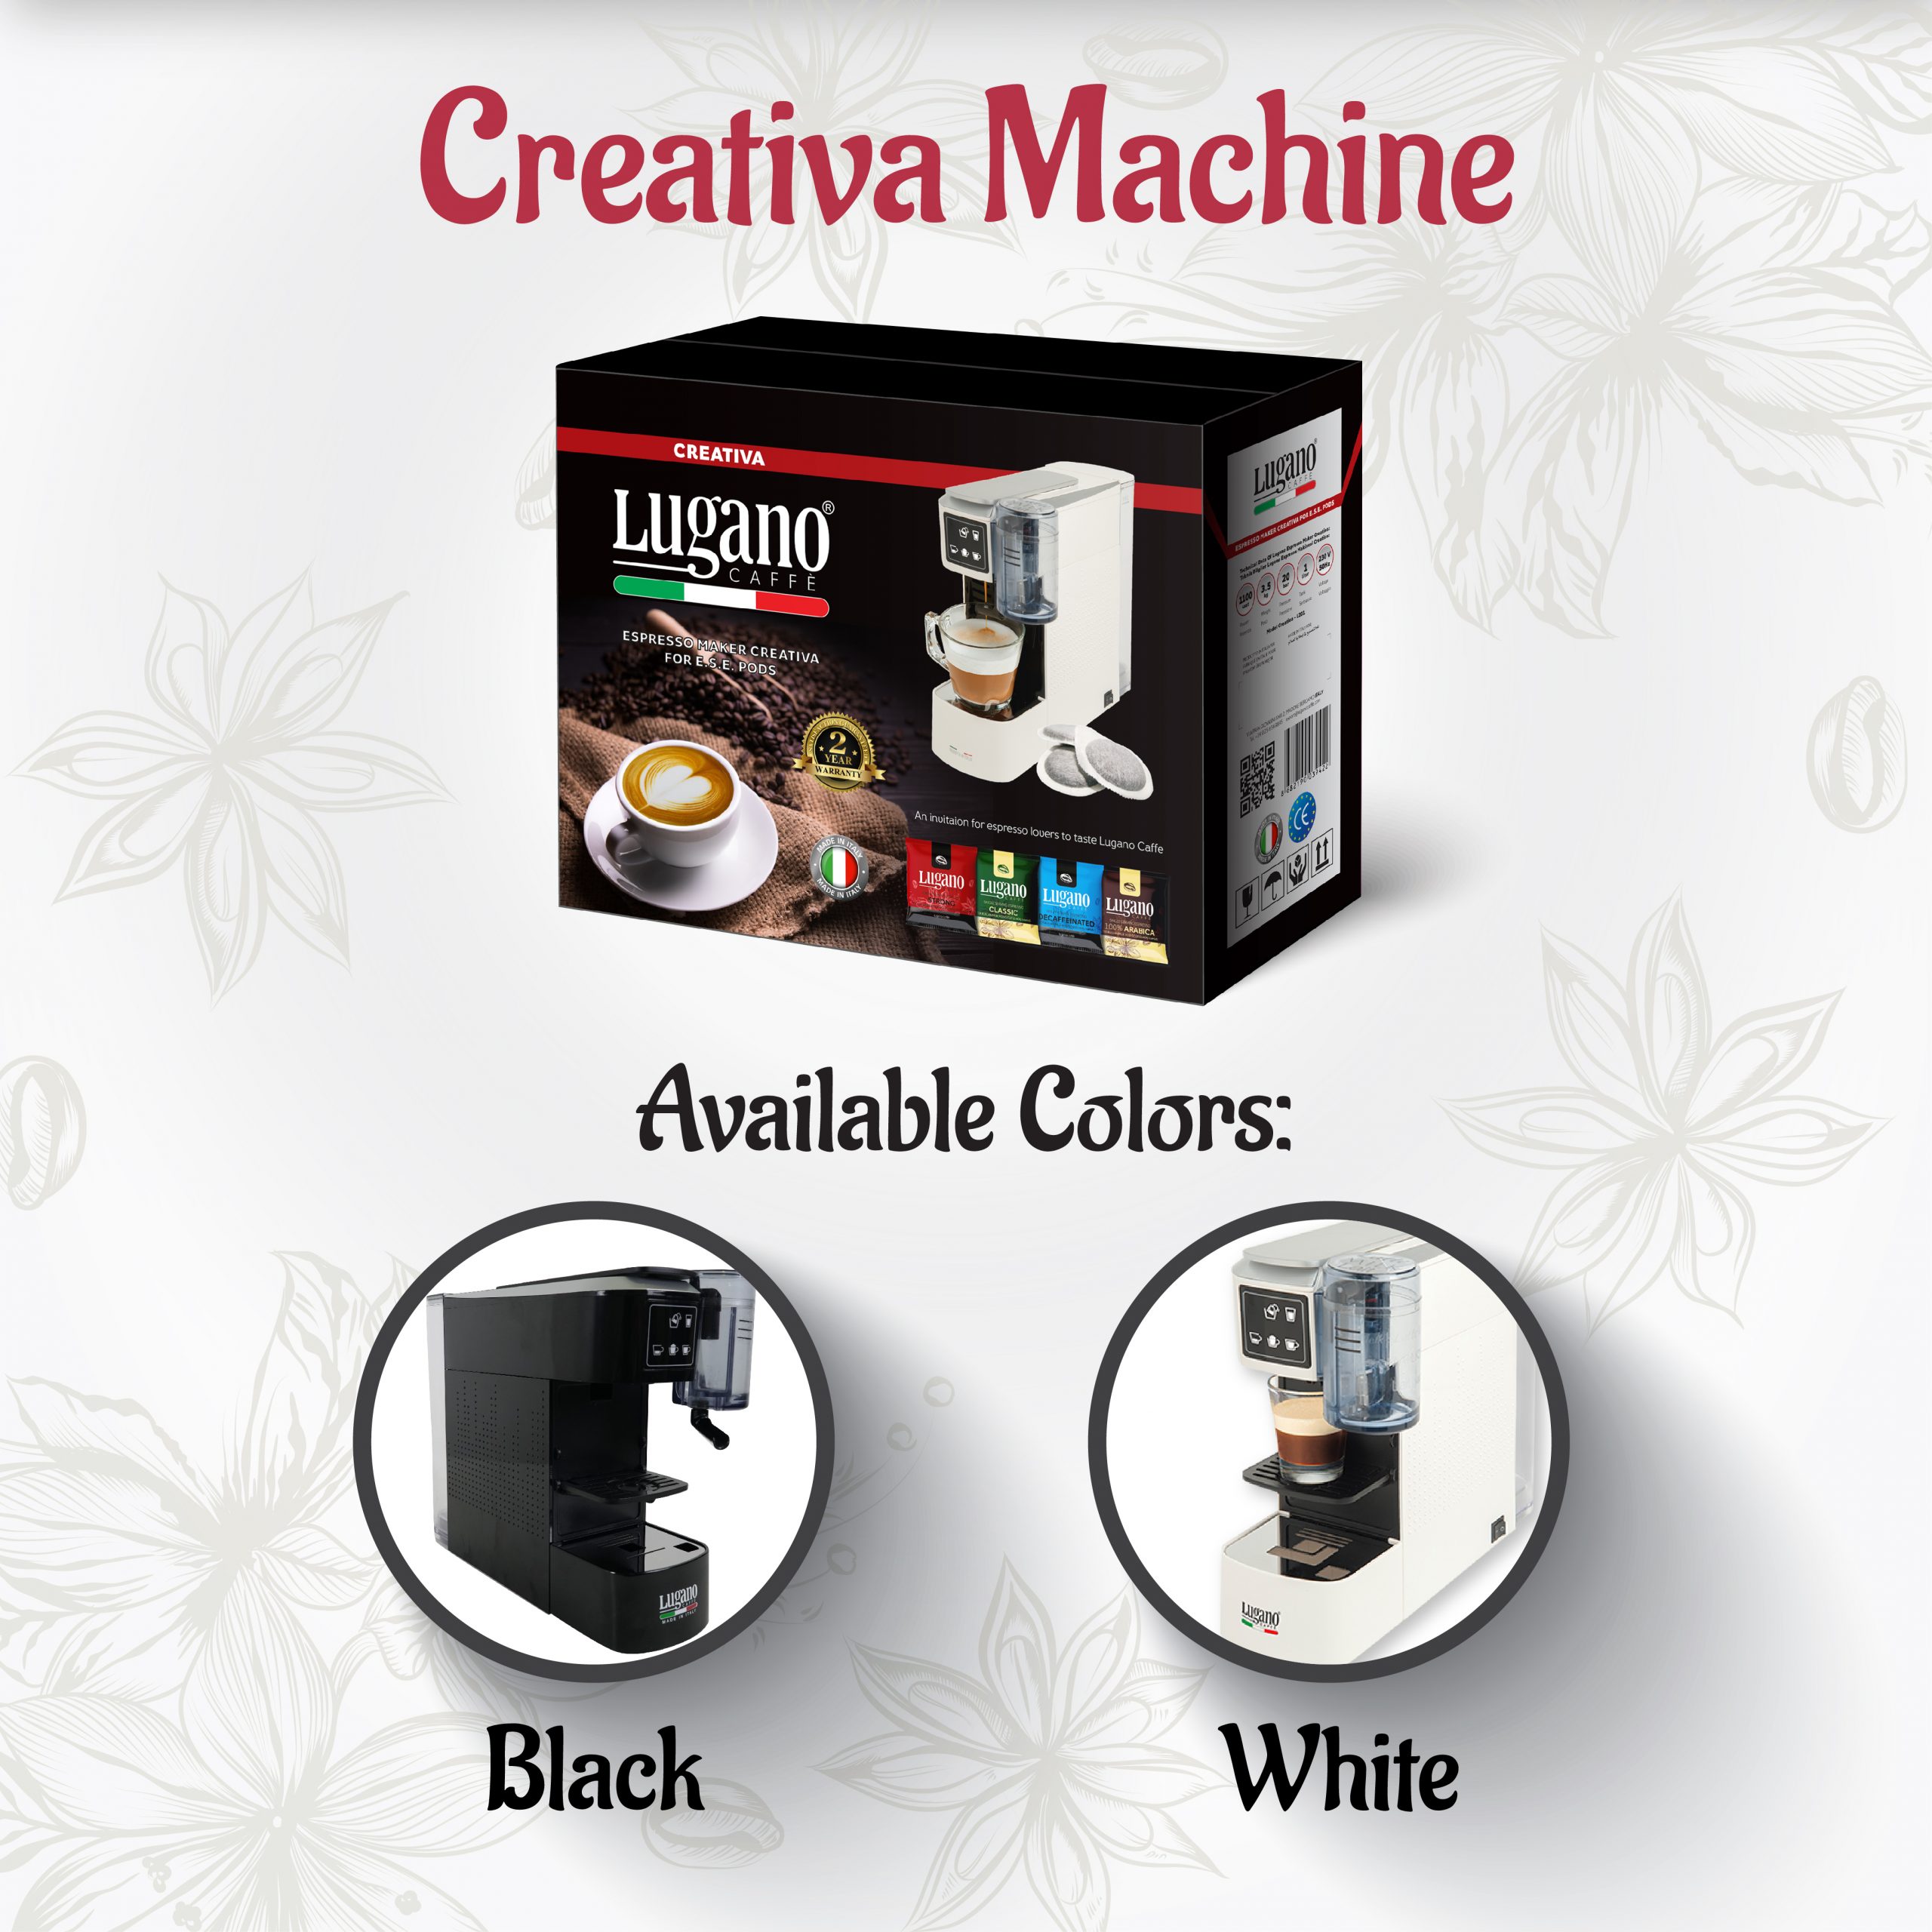 Lugnao Creativa Available Colors (Black - Red)